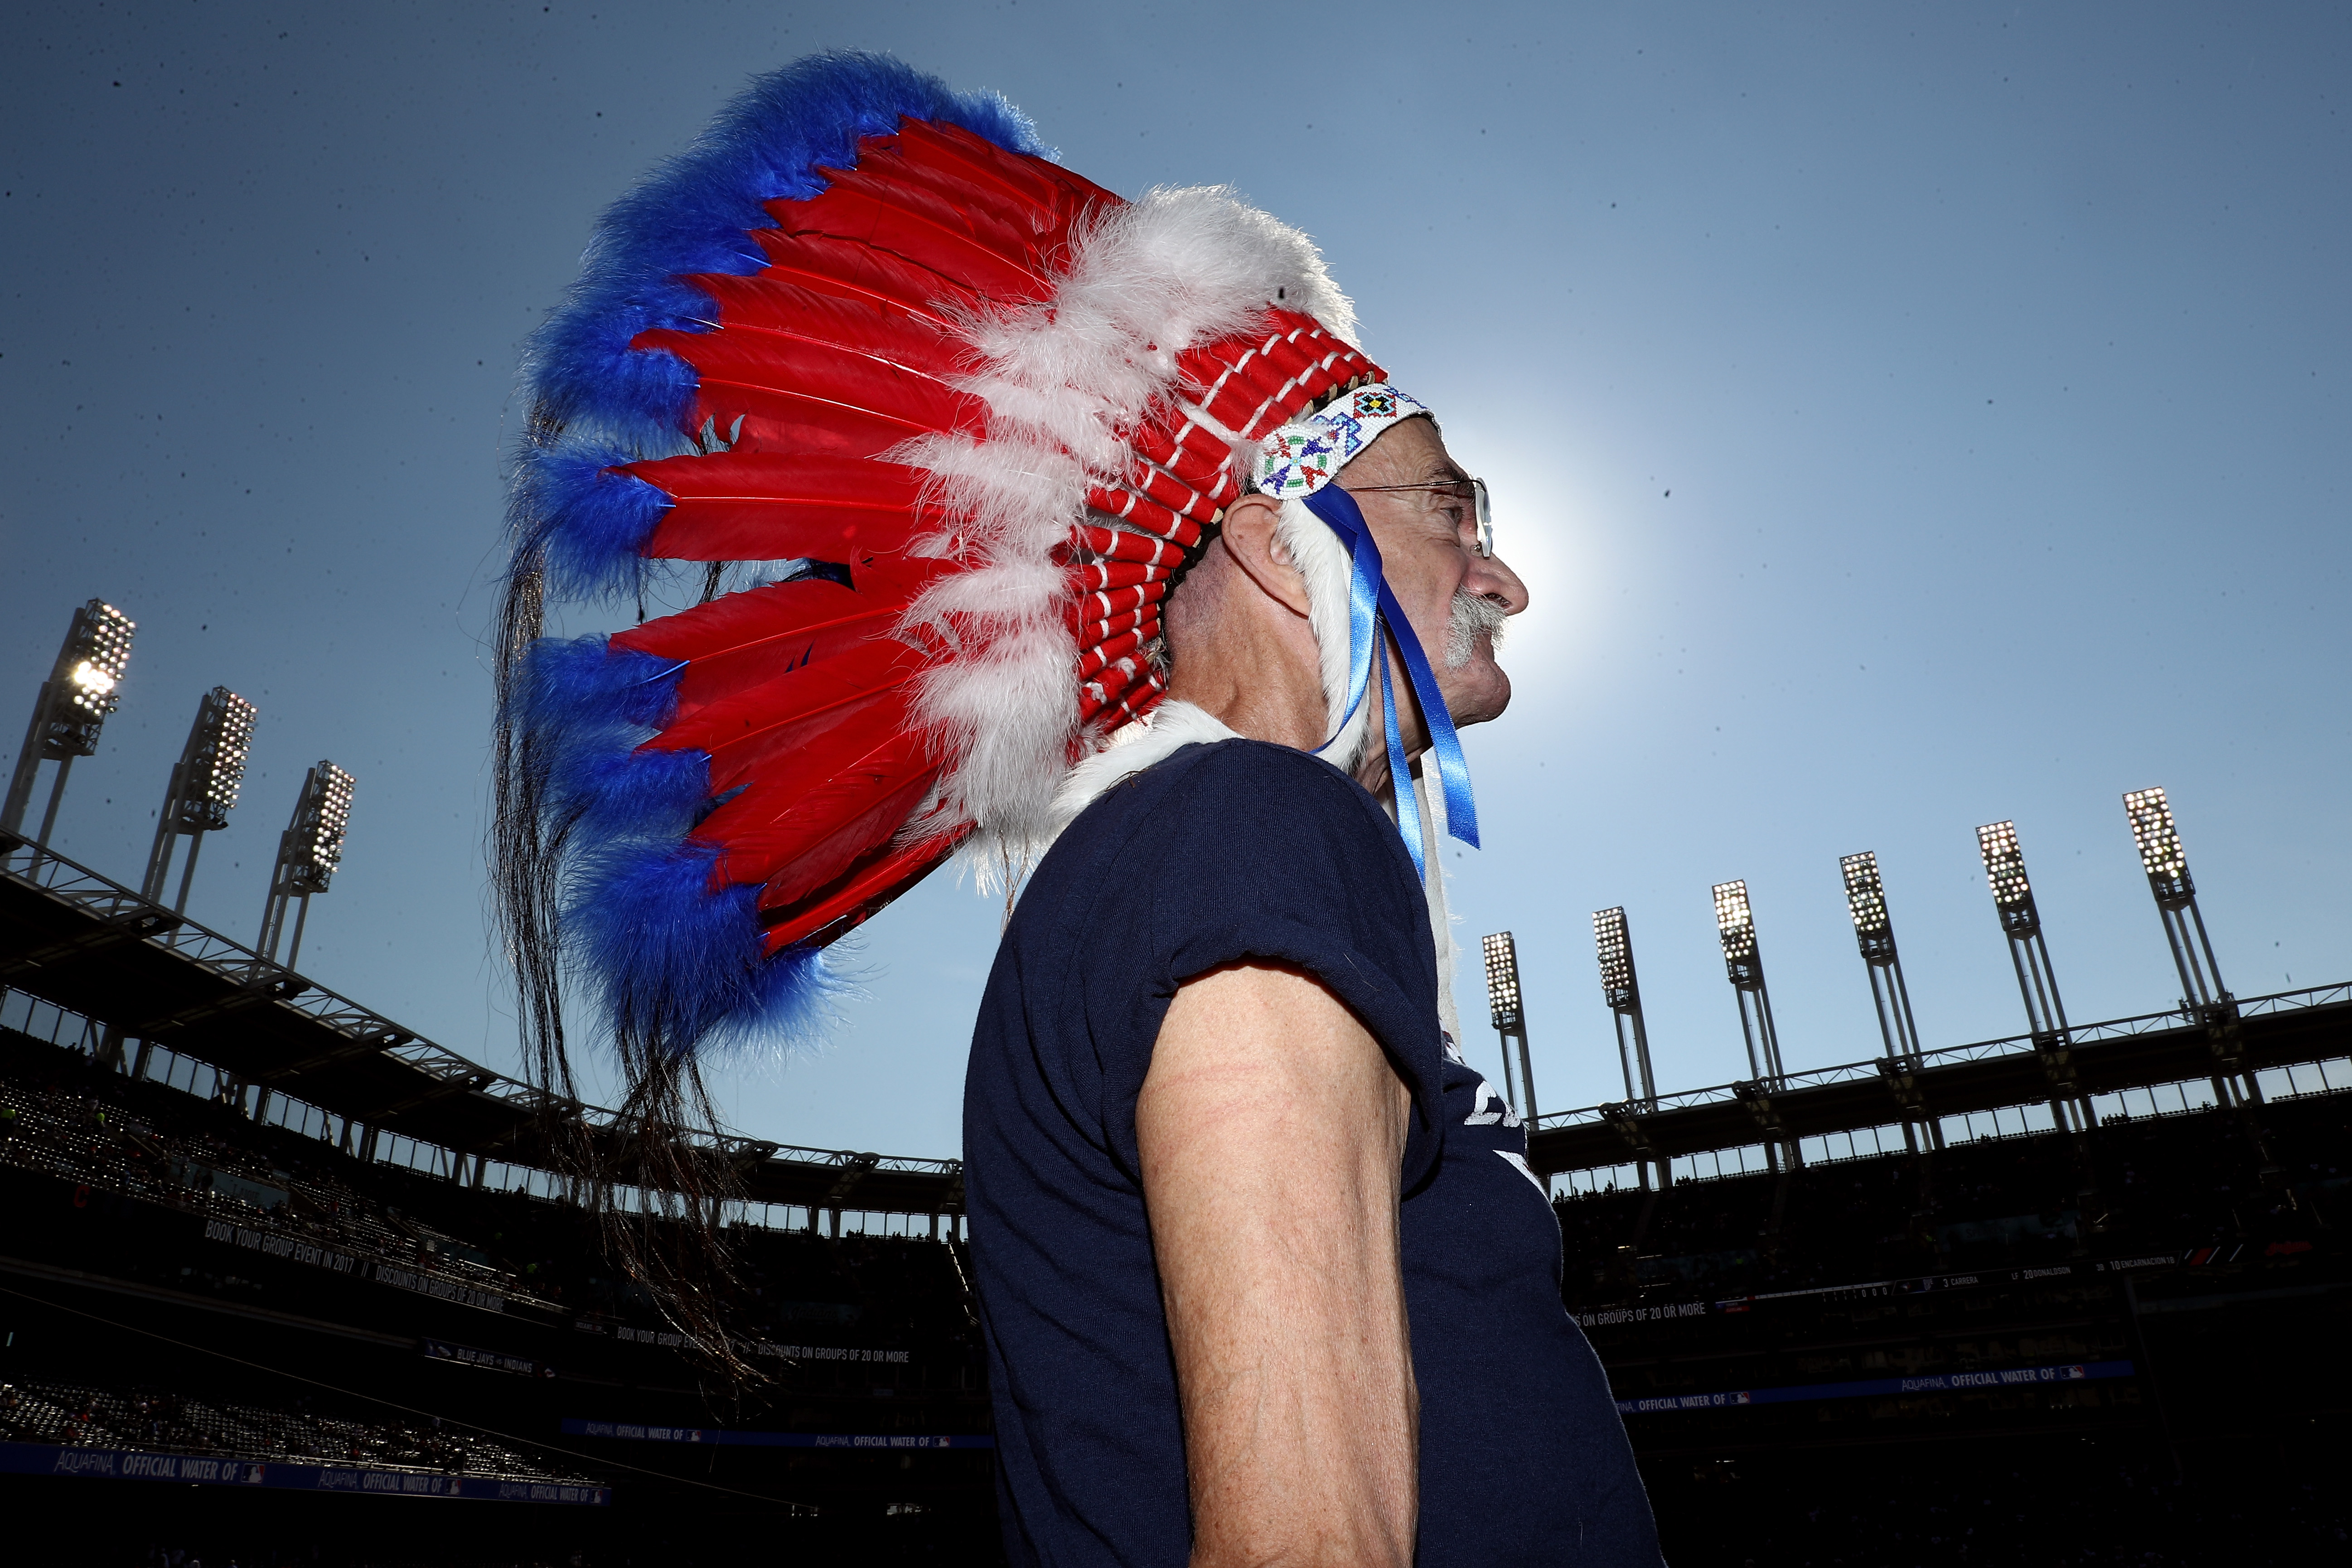 10 photos of Indians fans wearing racist costumes to the World Series